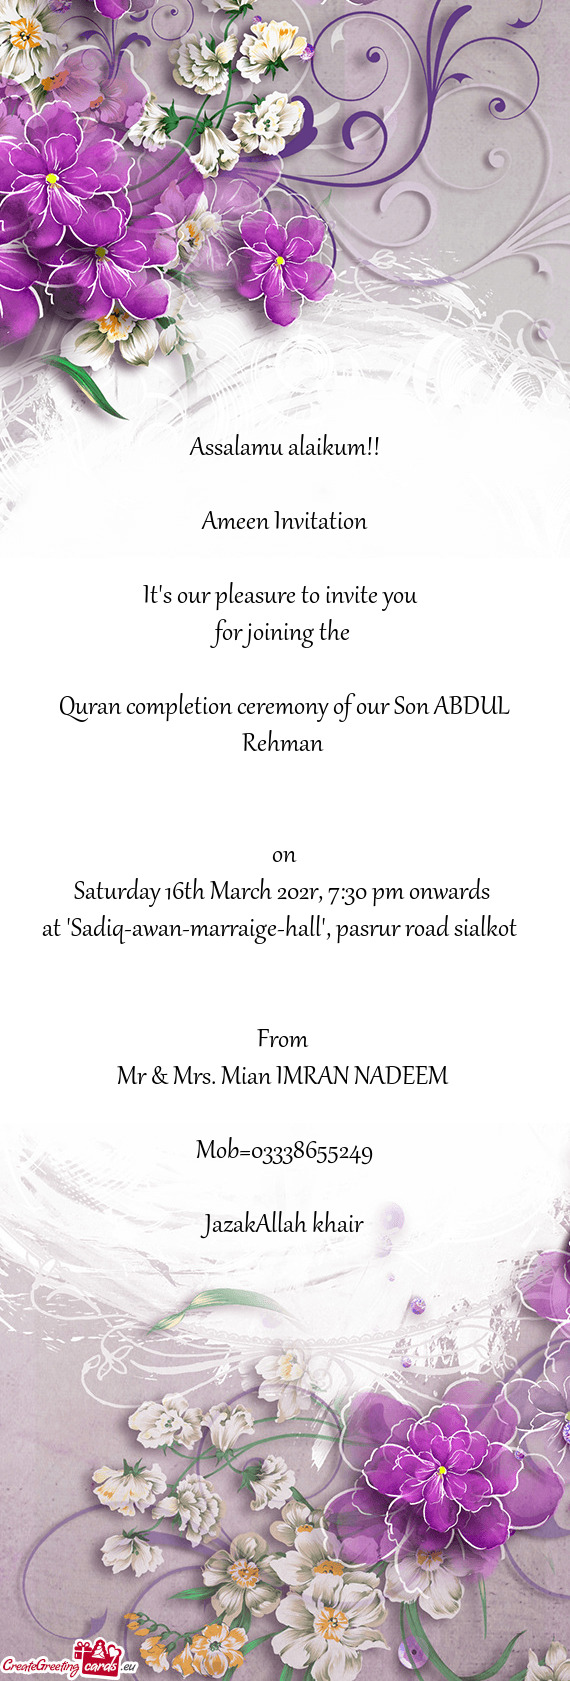 Quran completion ceremony of our Son ABDUL Rehman